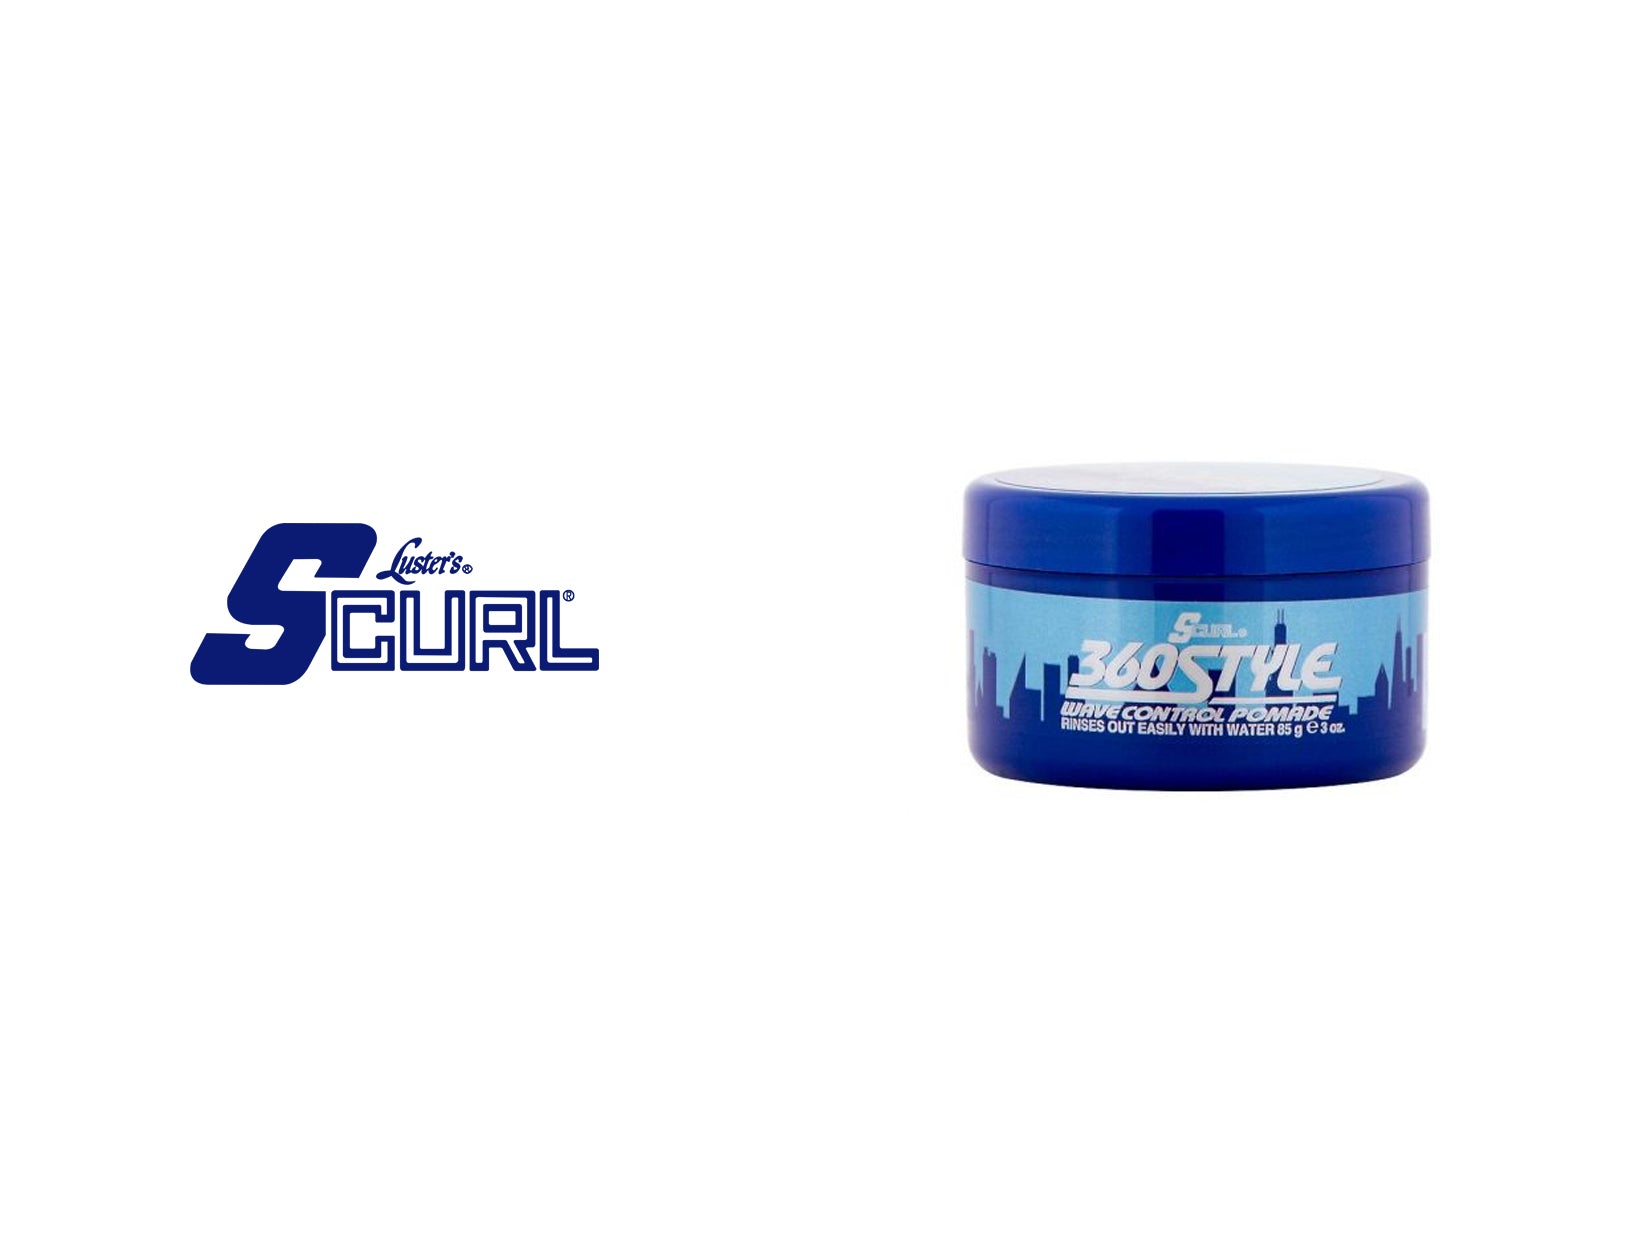 S CURL 360 STYLIN POMADE 3oz